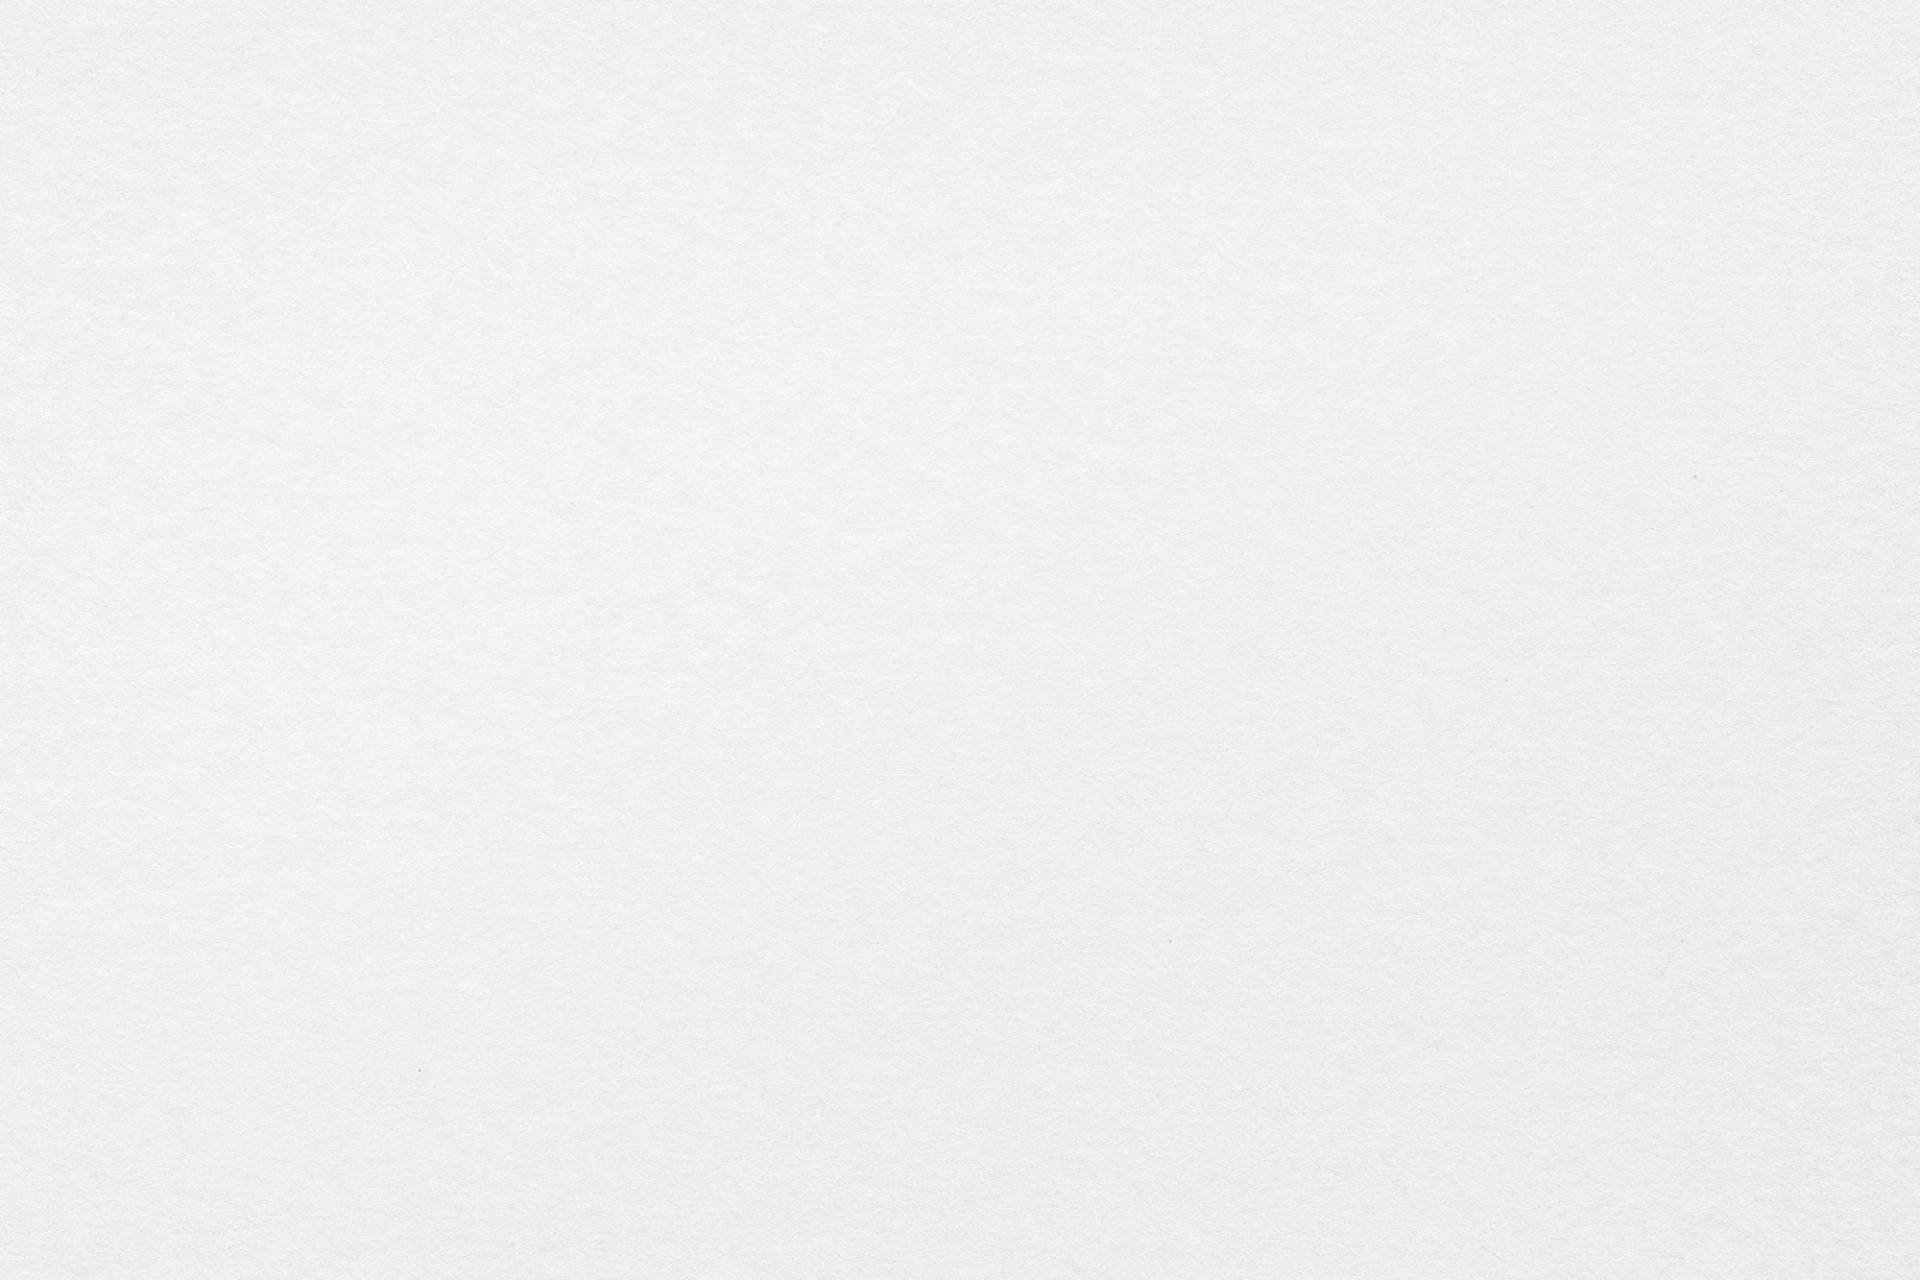 Caption: Soothing Simplicity: Pure White Hd Wallpaper